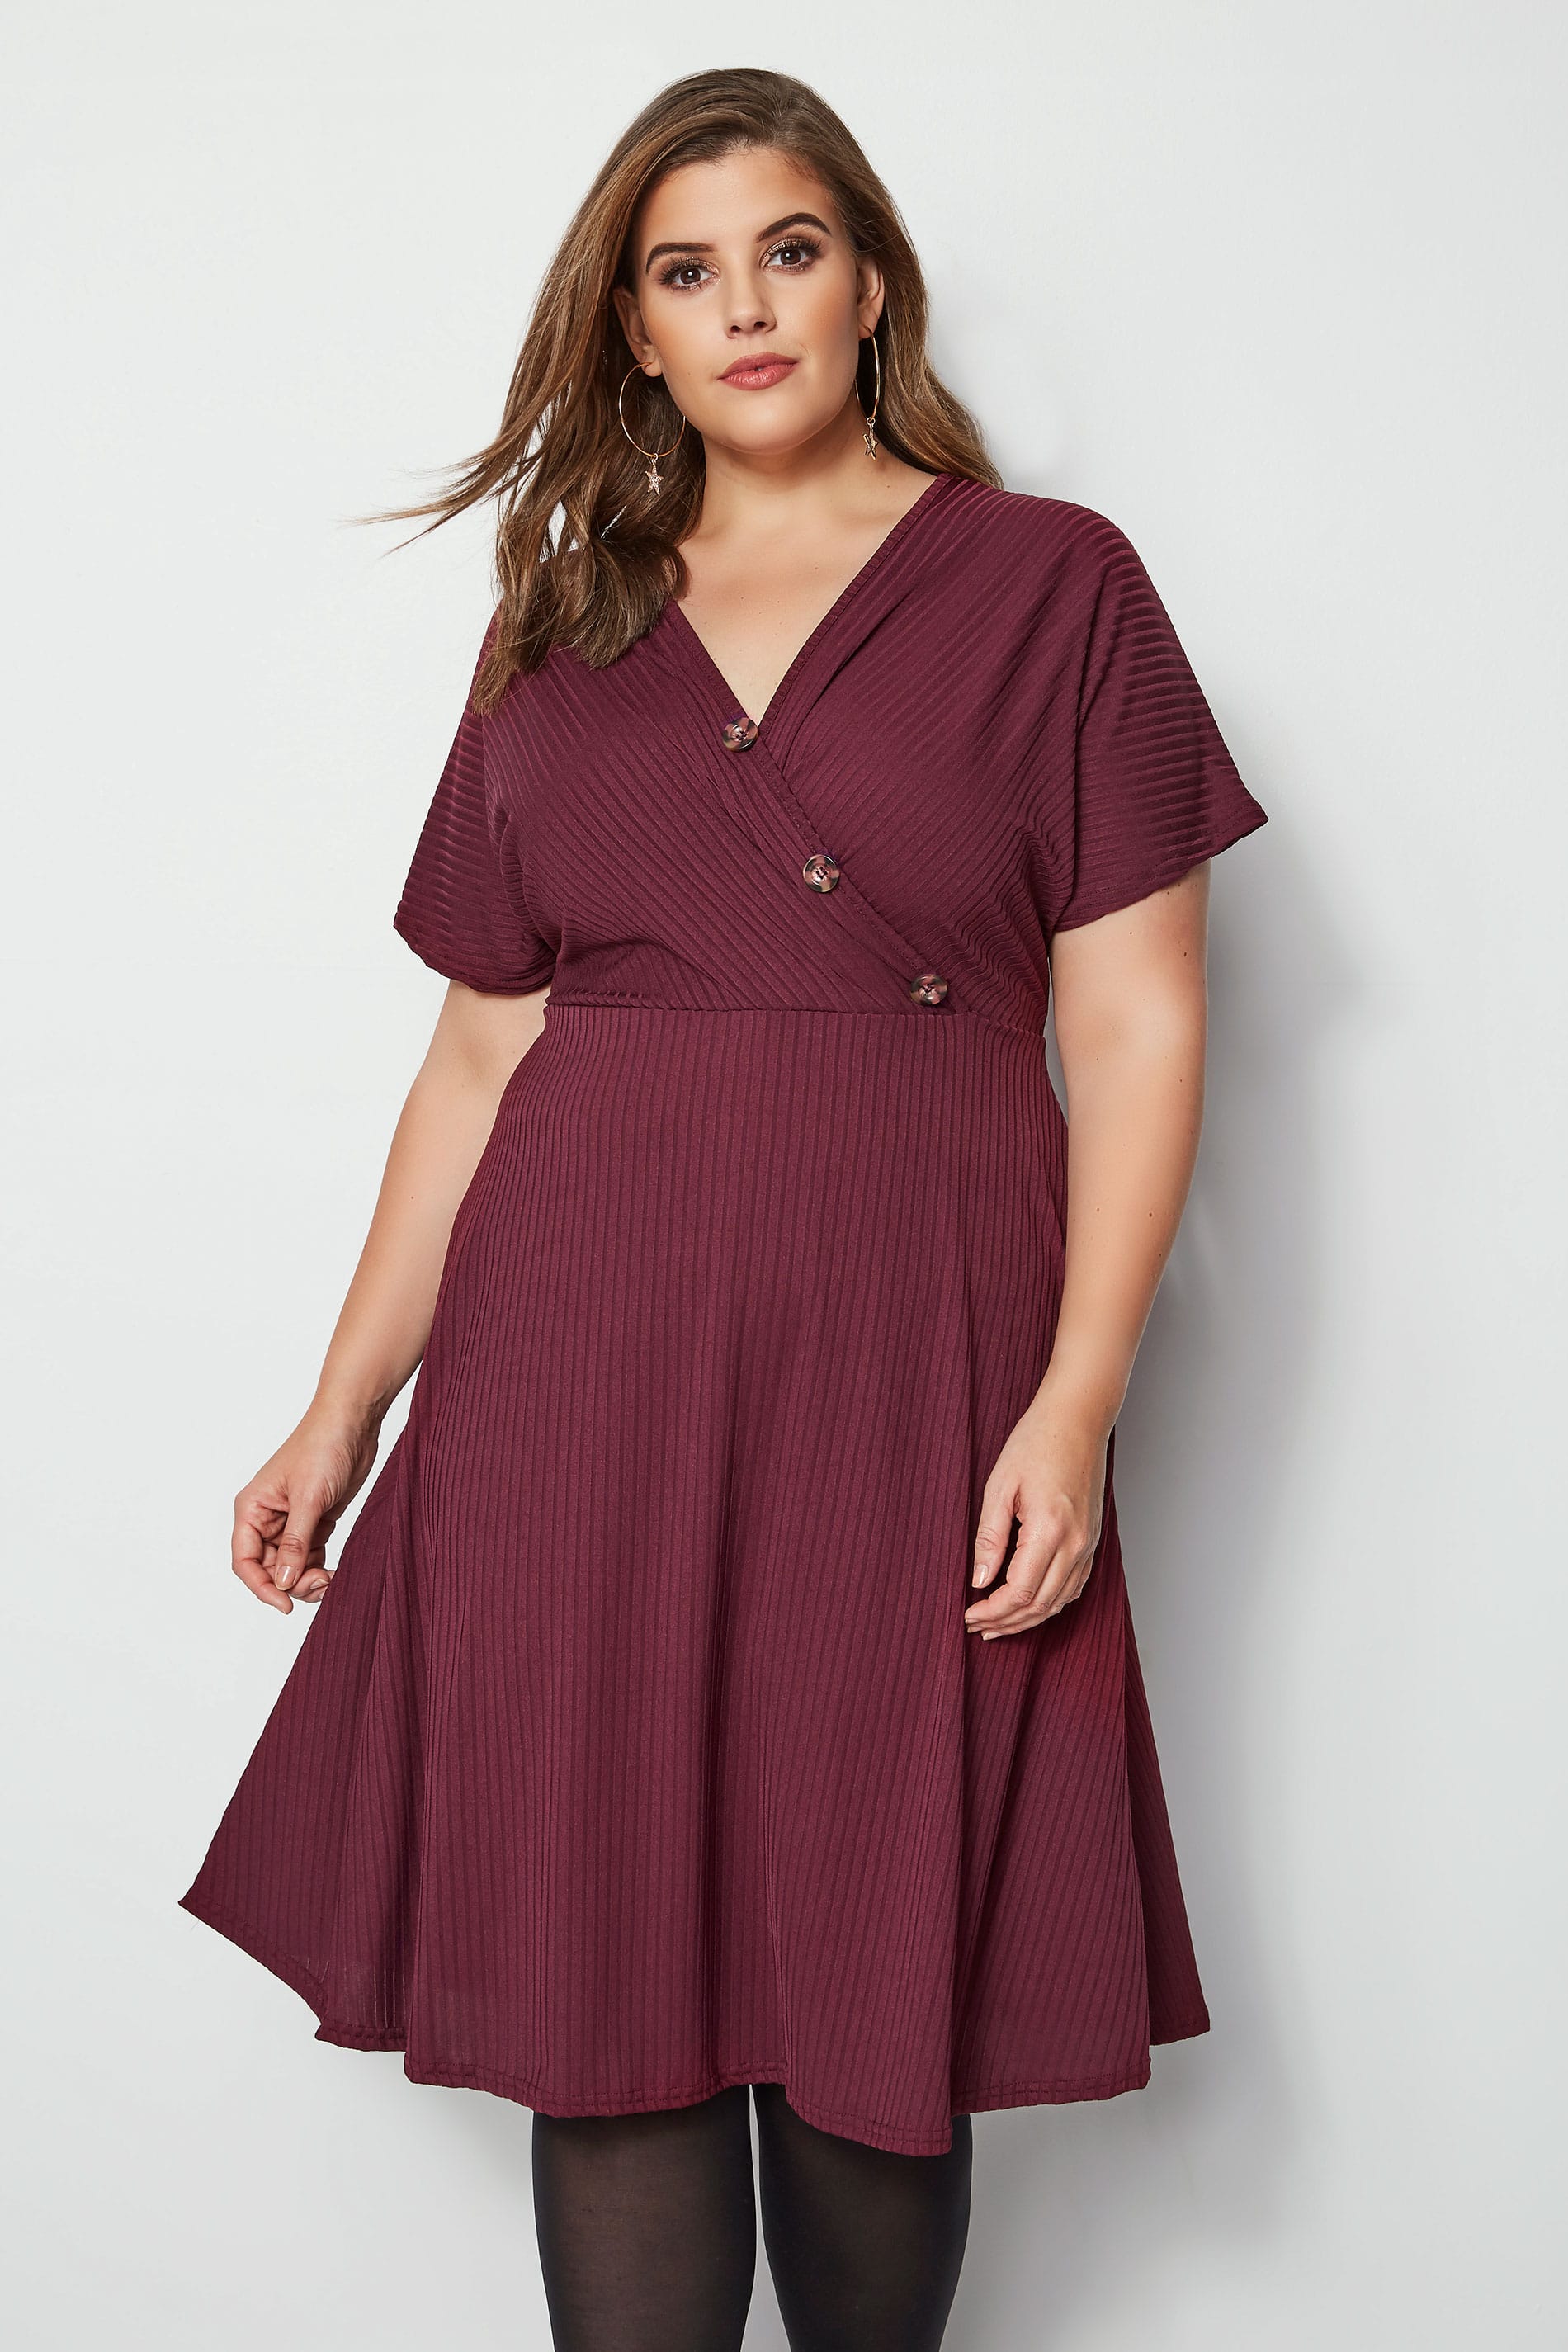 Burgundy Ribbed Wrap Front Dress, Plus size 16 to 36